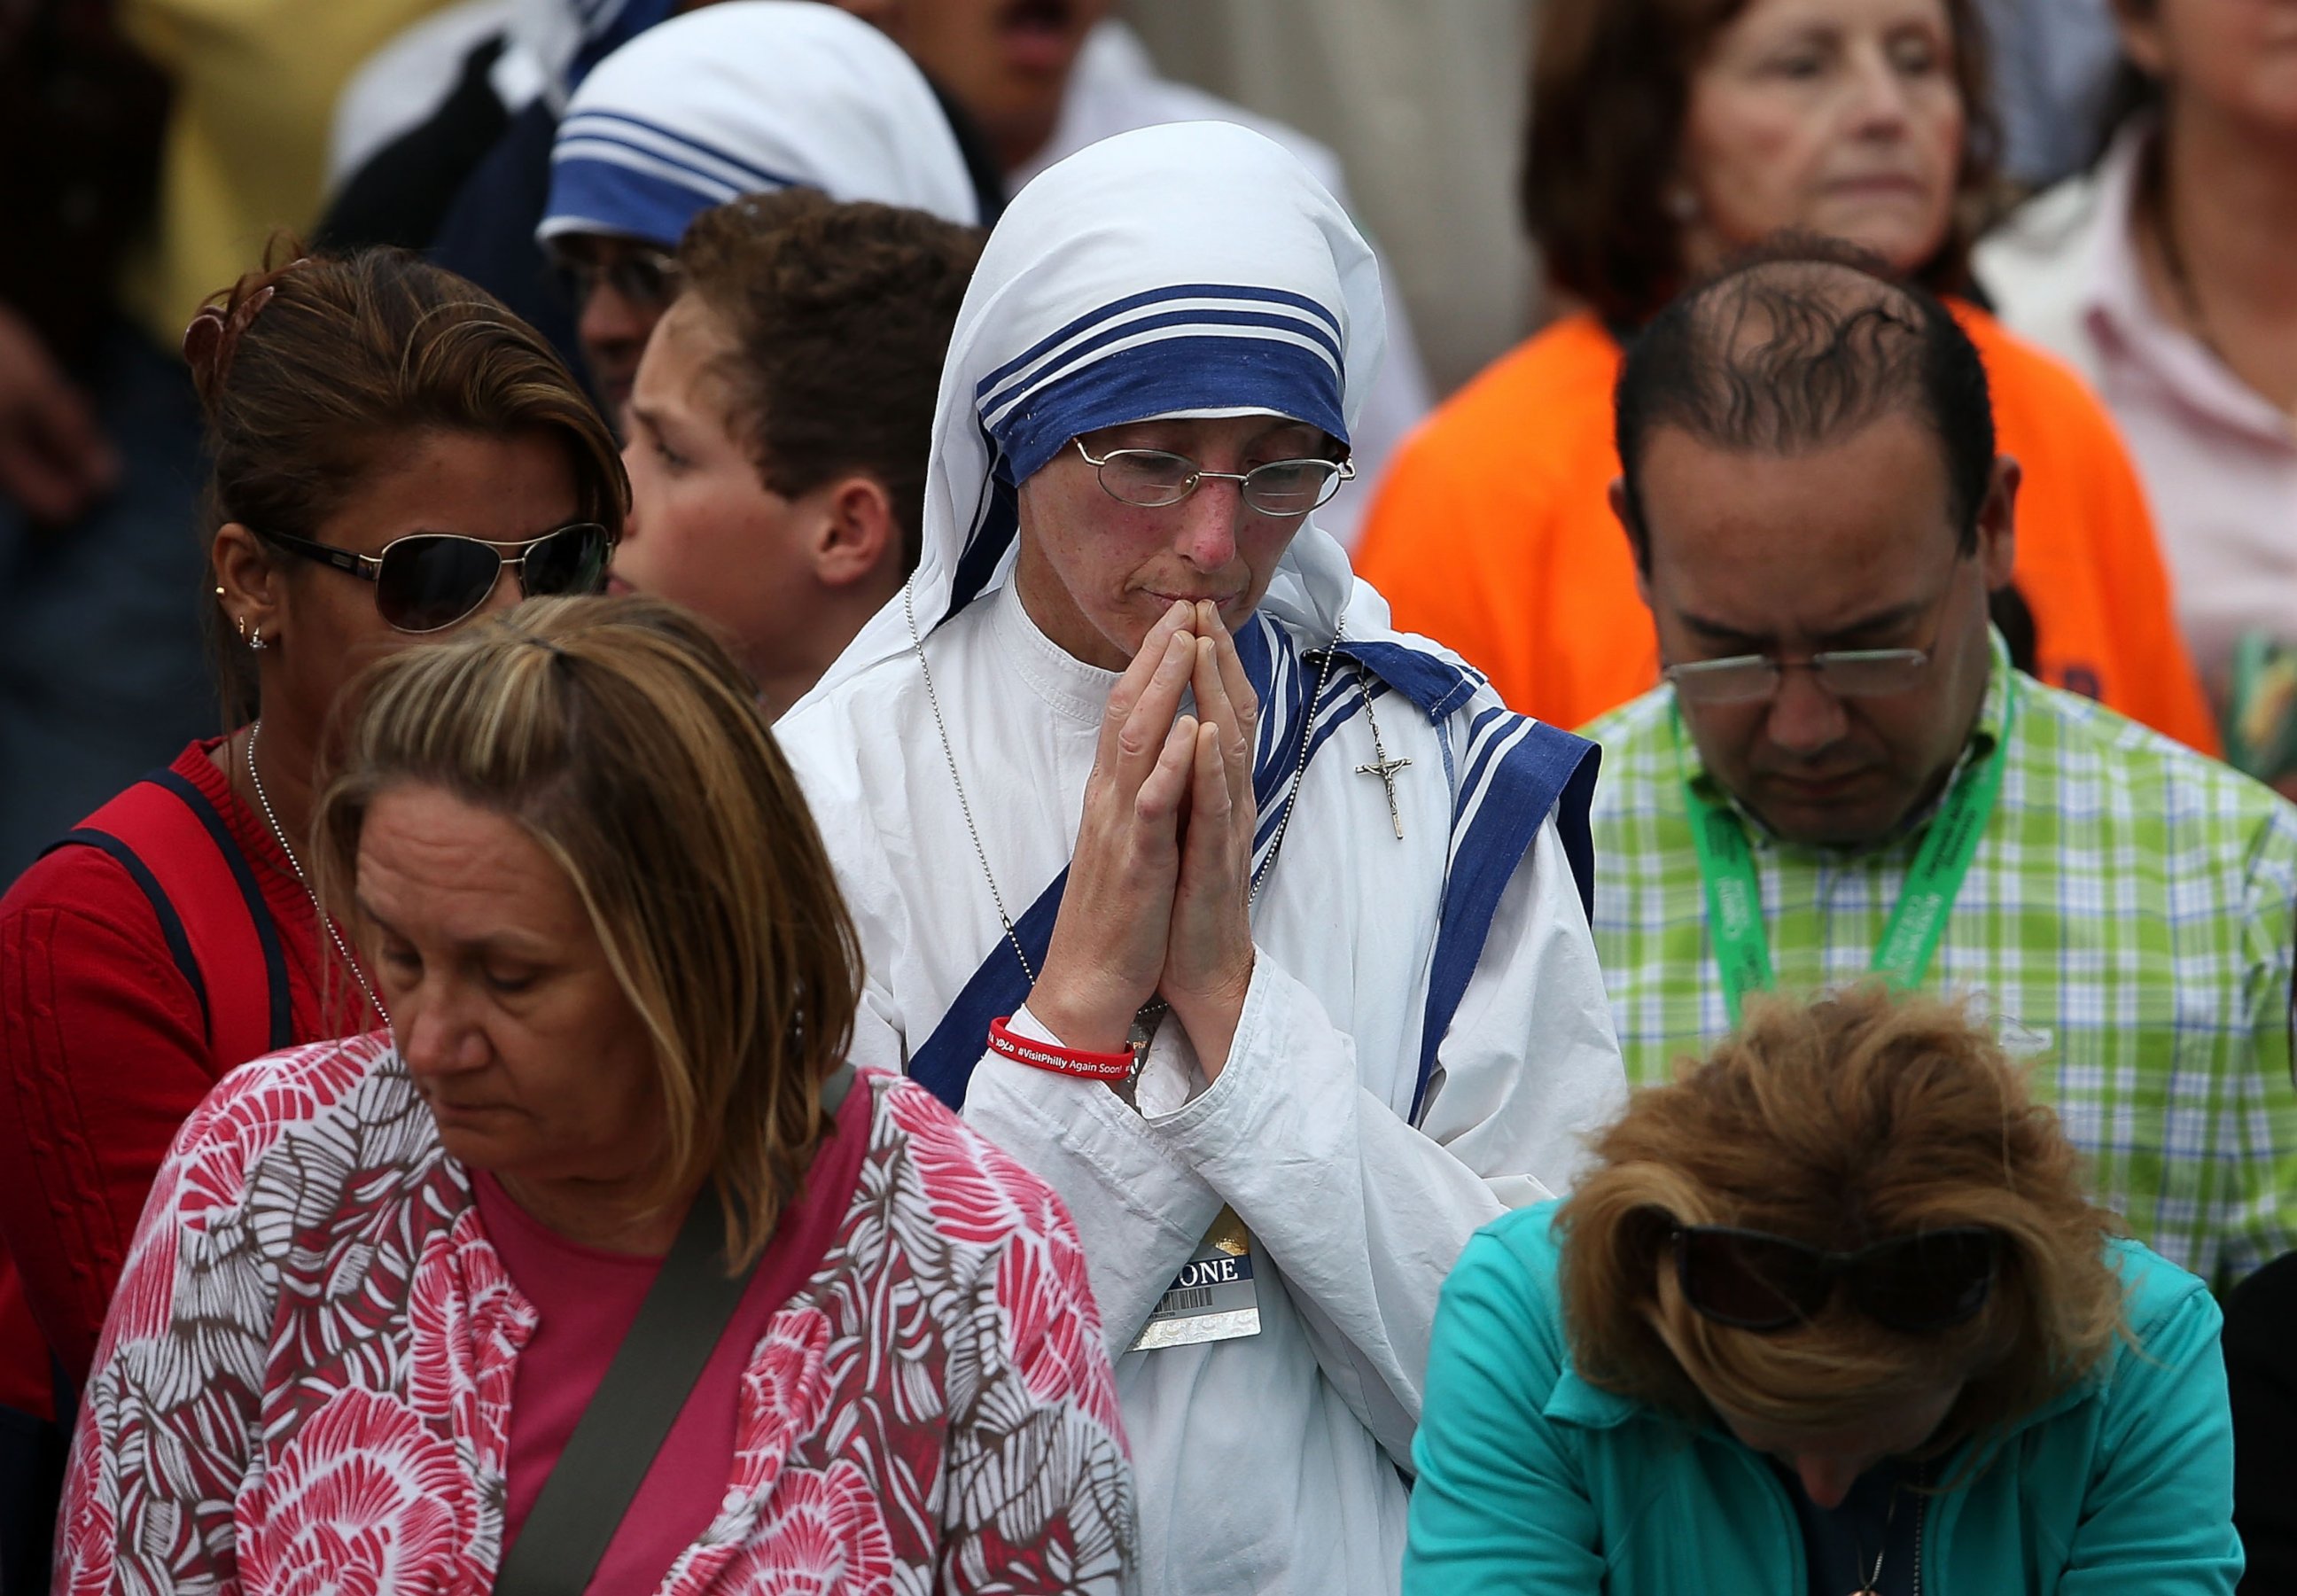 PHOTO: Spectators pray as they listen to the papal Mass during the World Meeting of Families on Sept. 27, 2015 in Philadelphia.